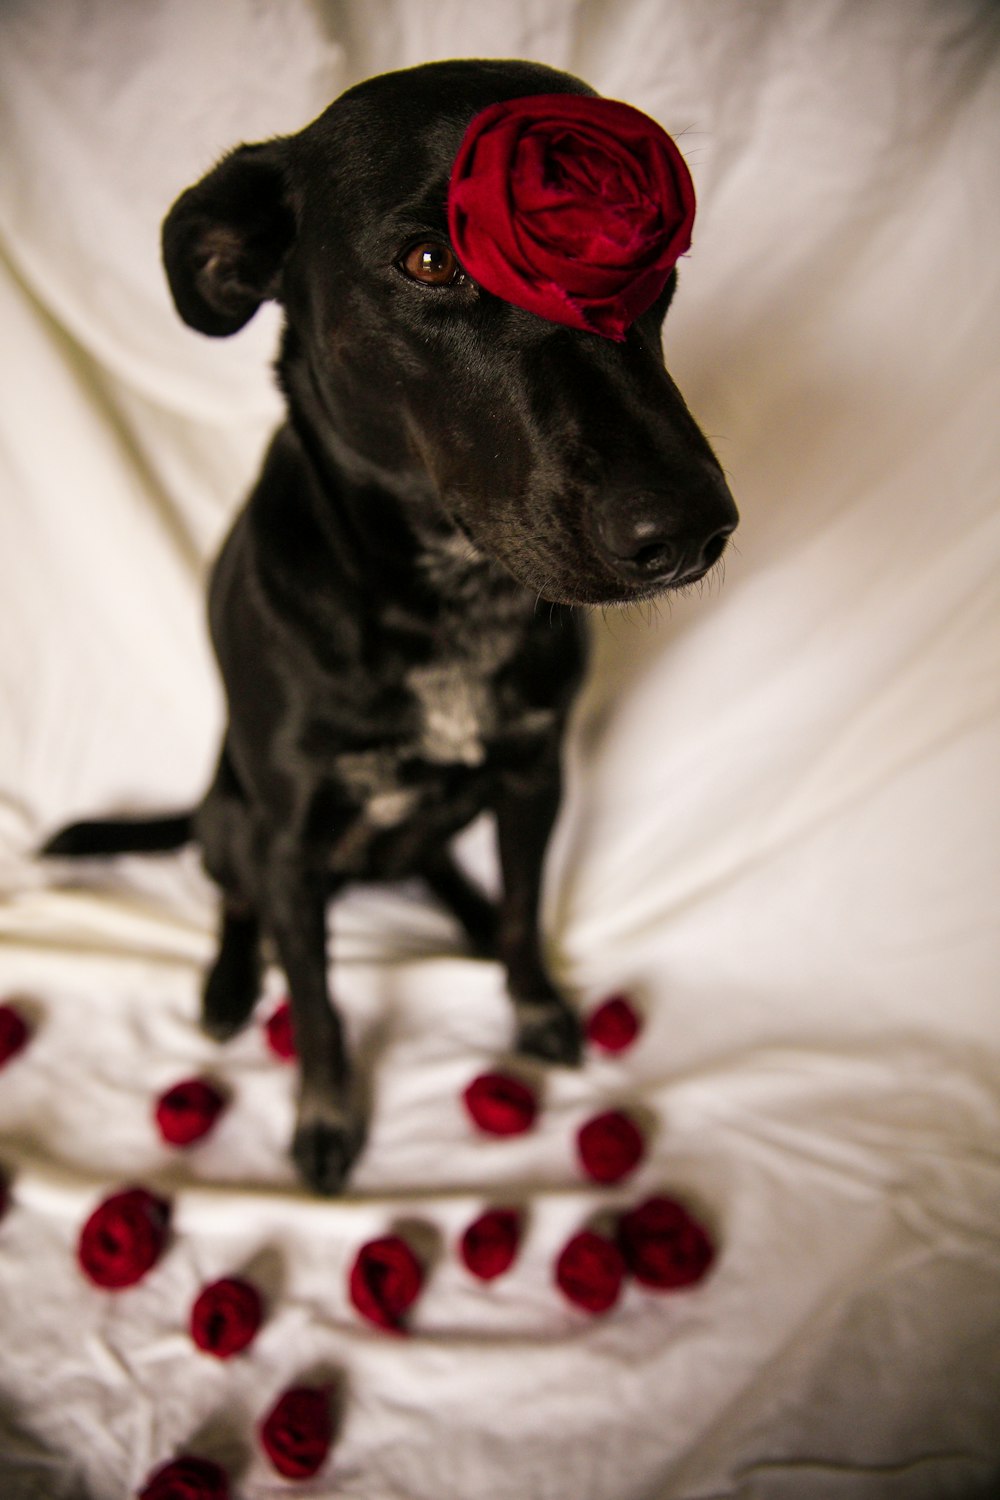 short-coated black dog standing still with red rose in head